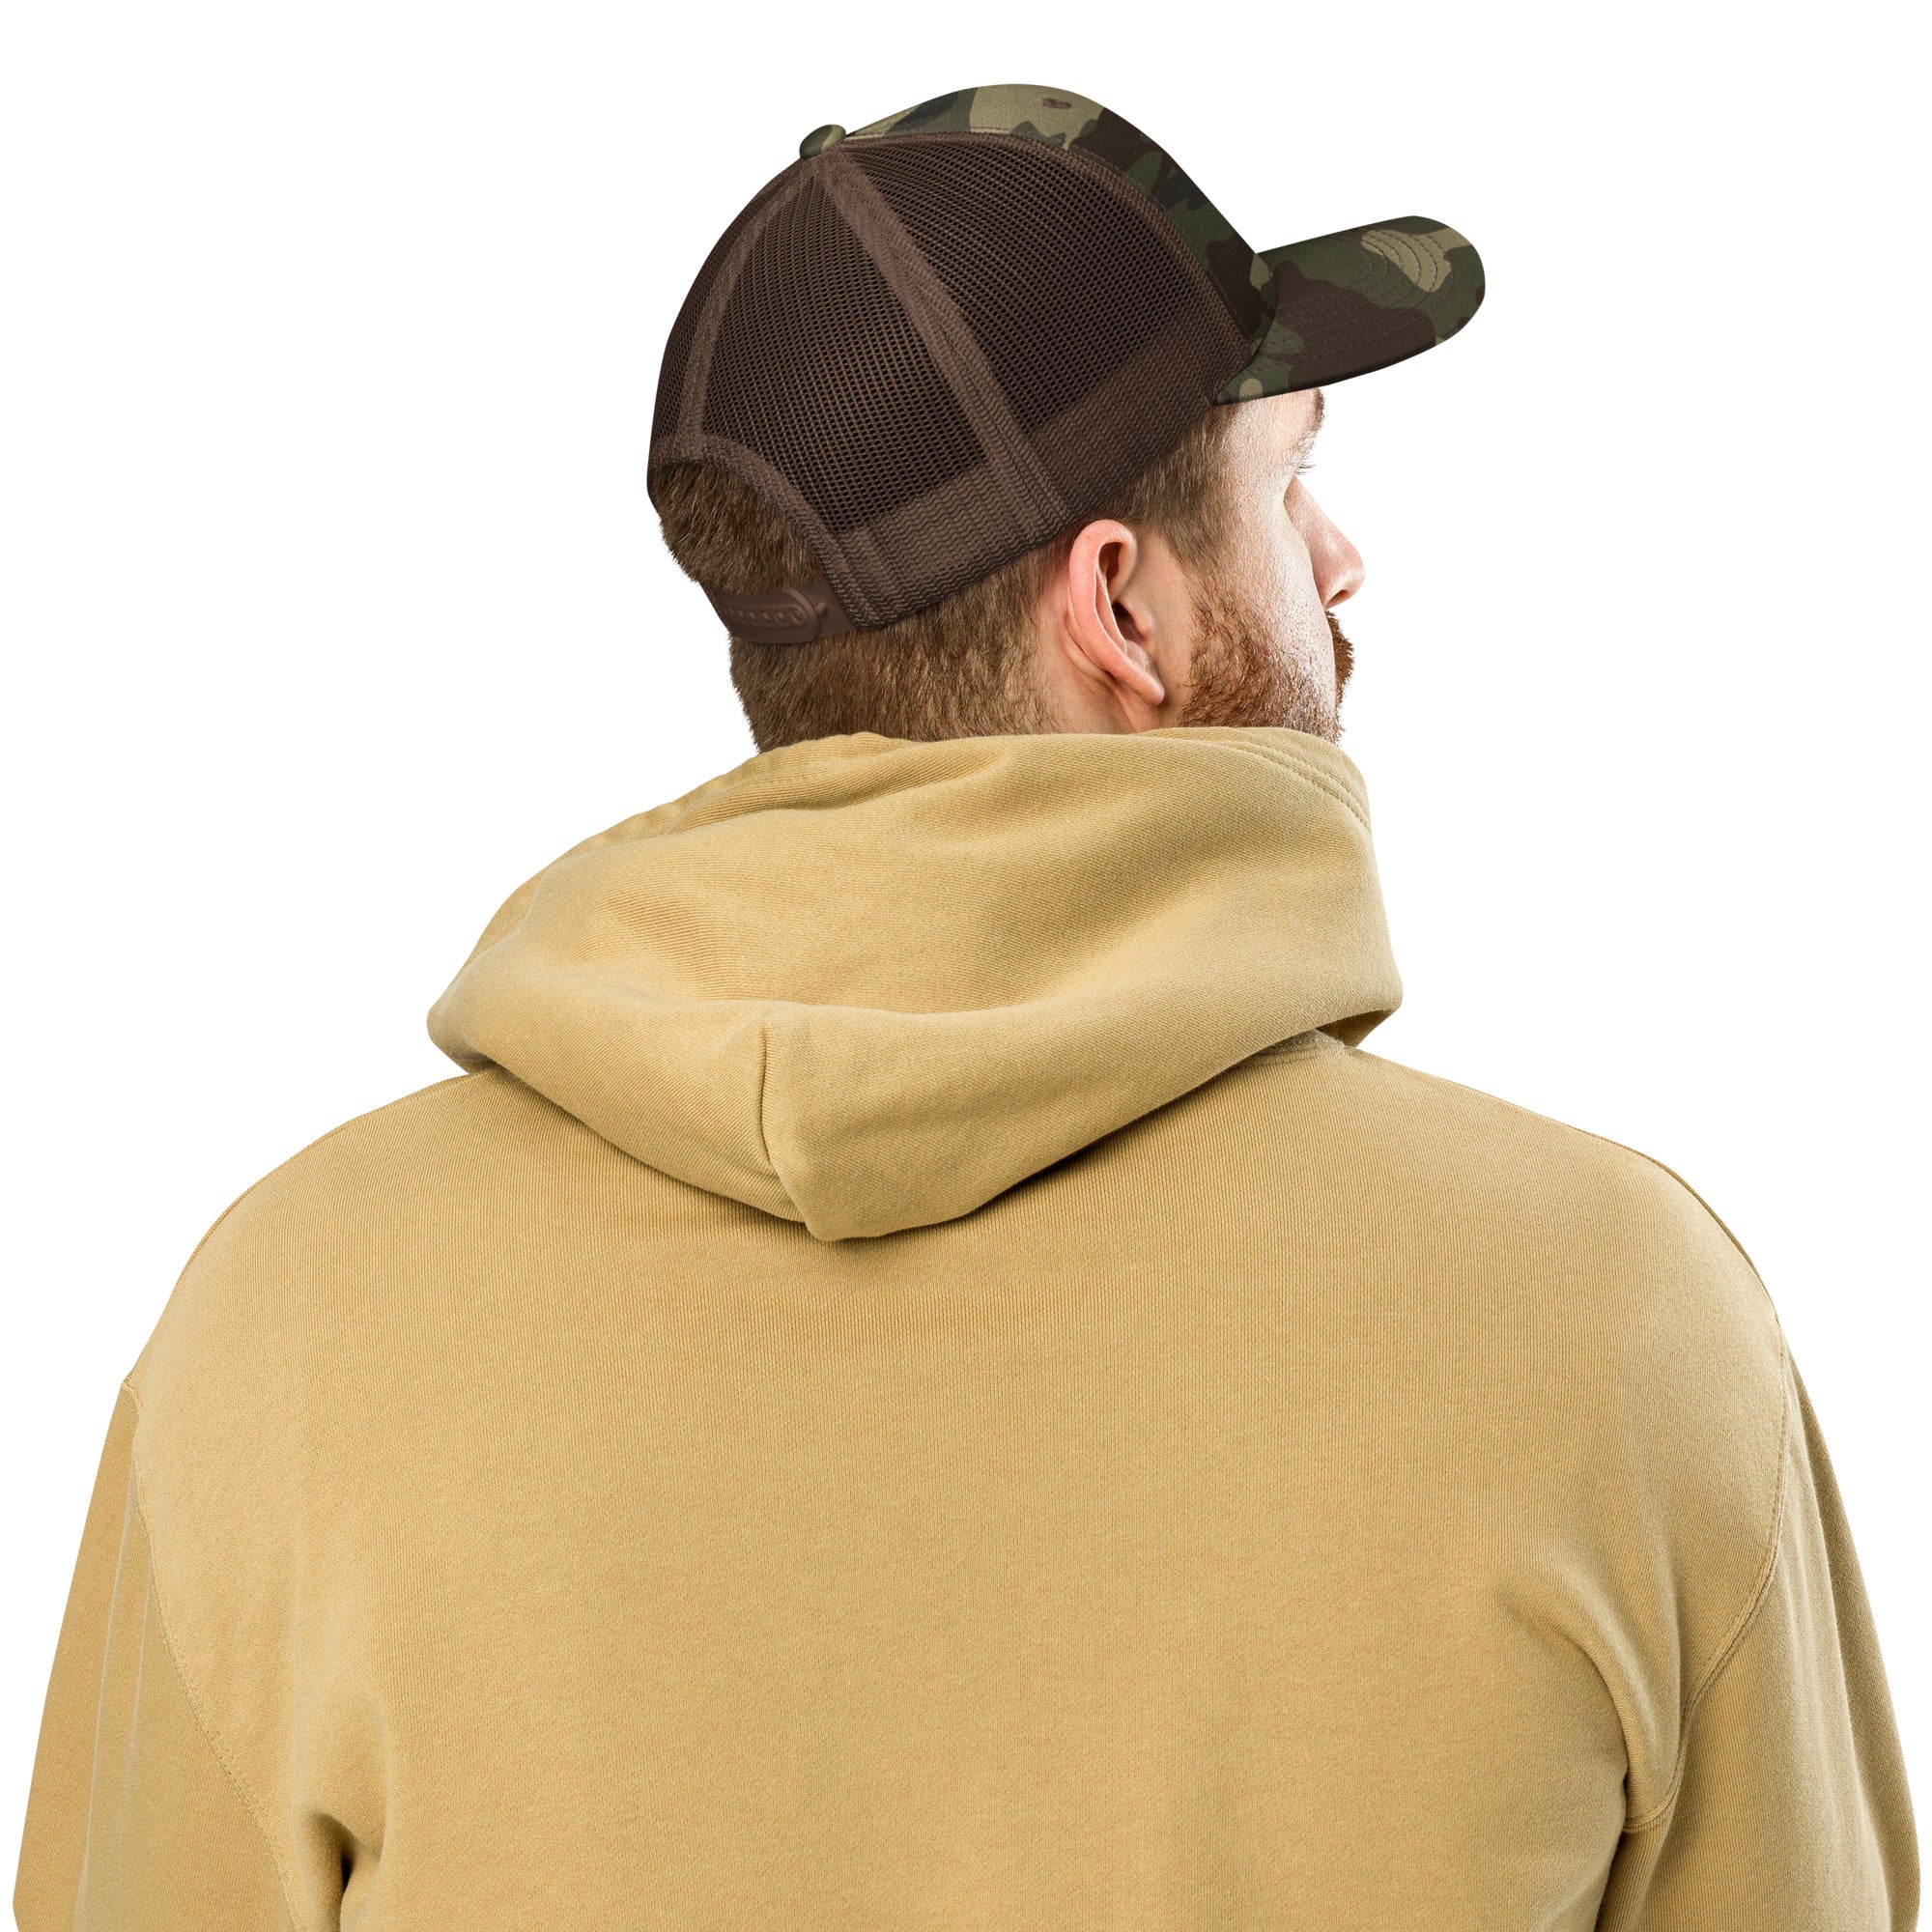 Drifthook Camouflage Trucker Hat - Camo with Brown Back